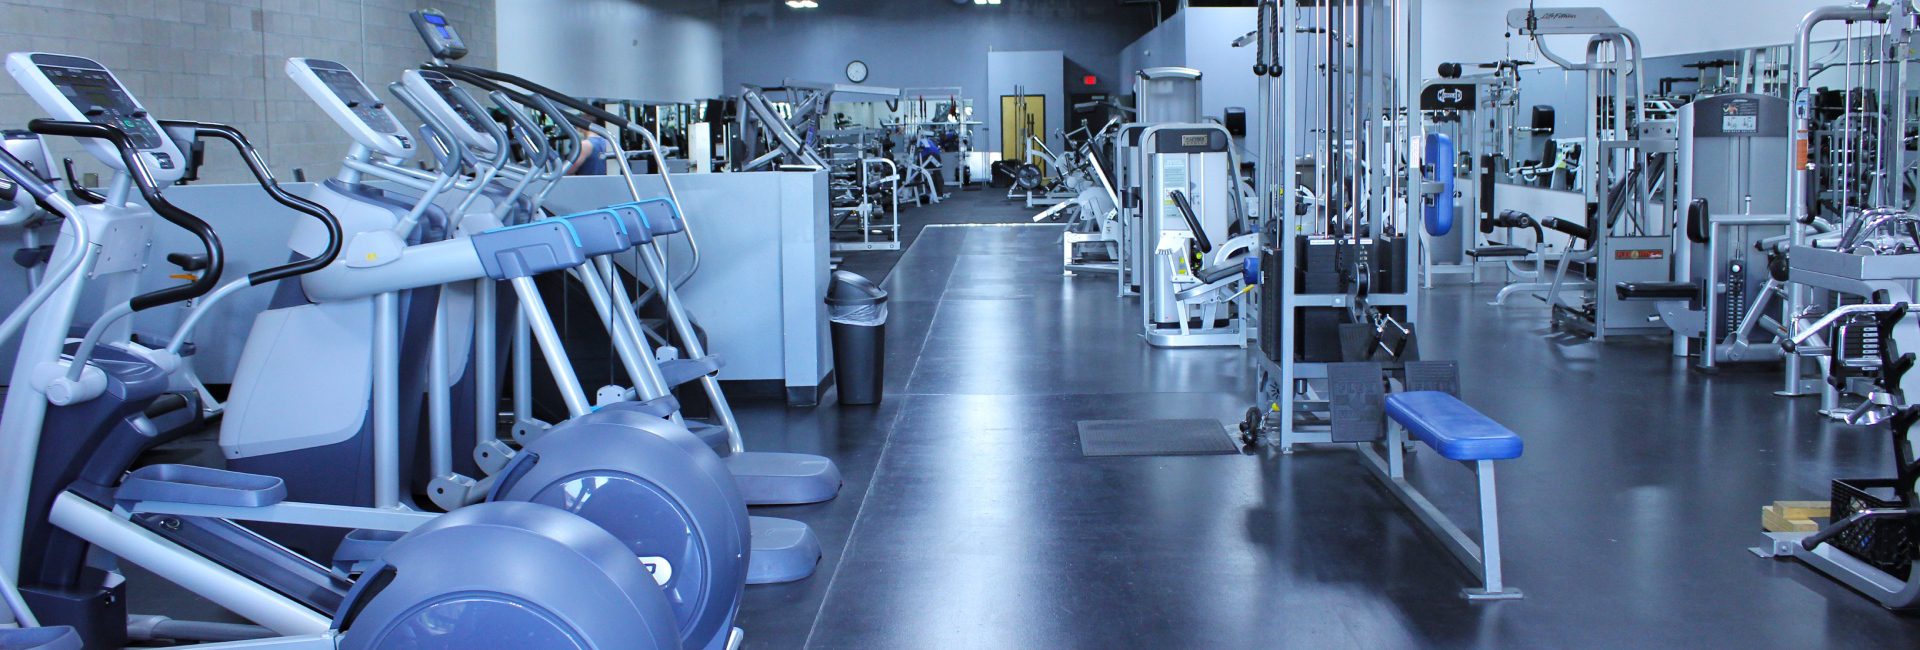 Entire health club in Albuquerque with the best amenities powerflex gyms